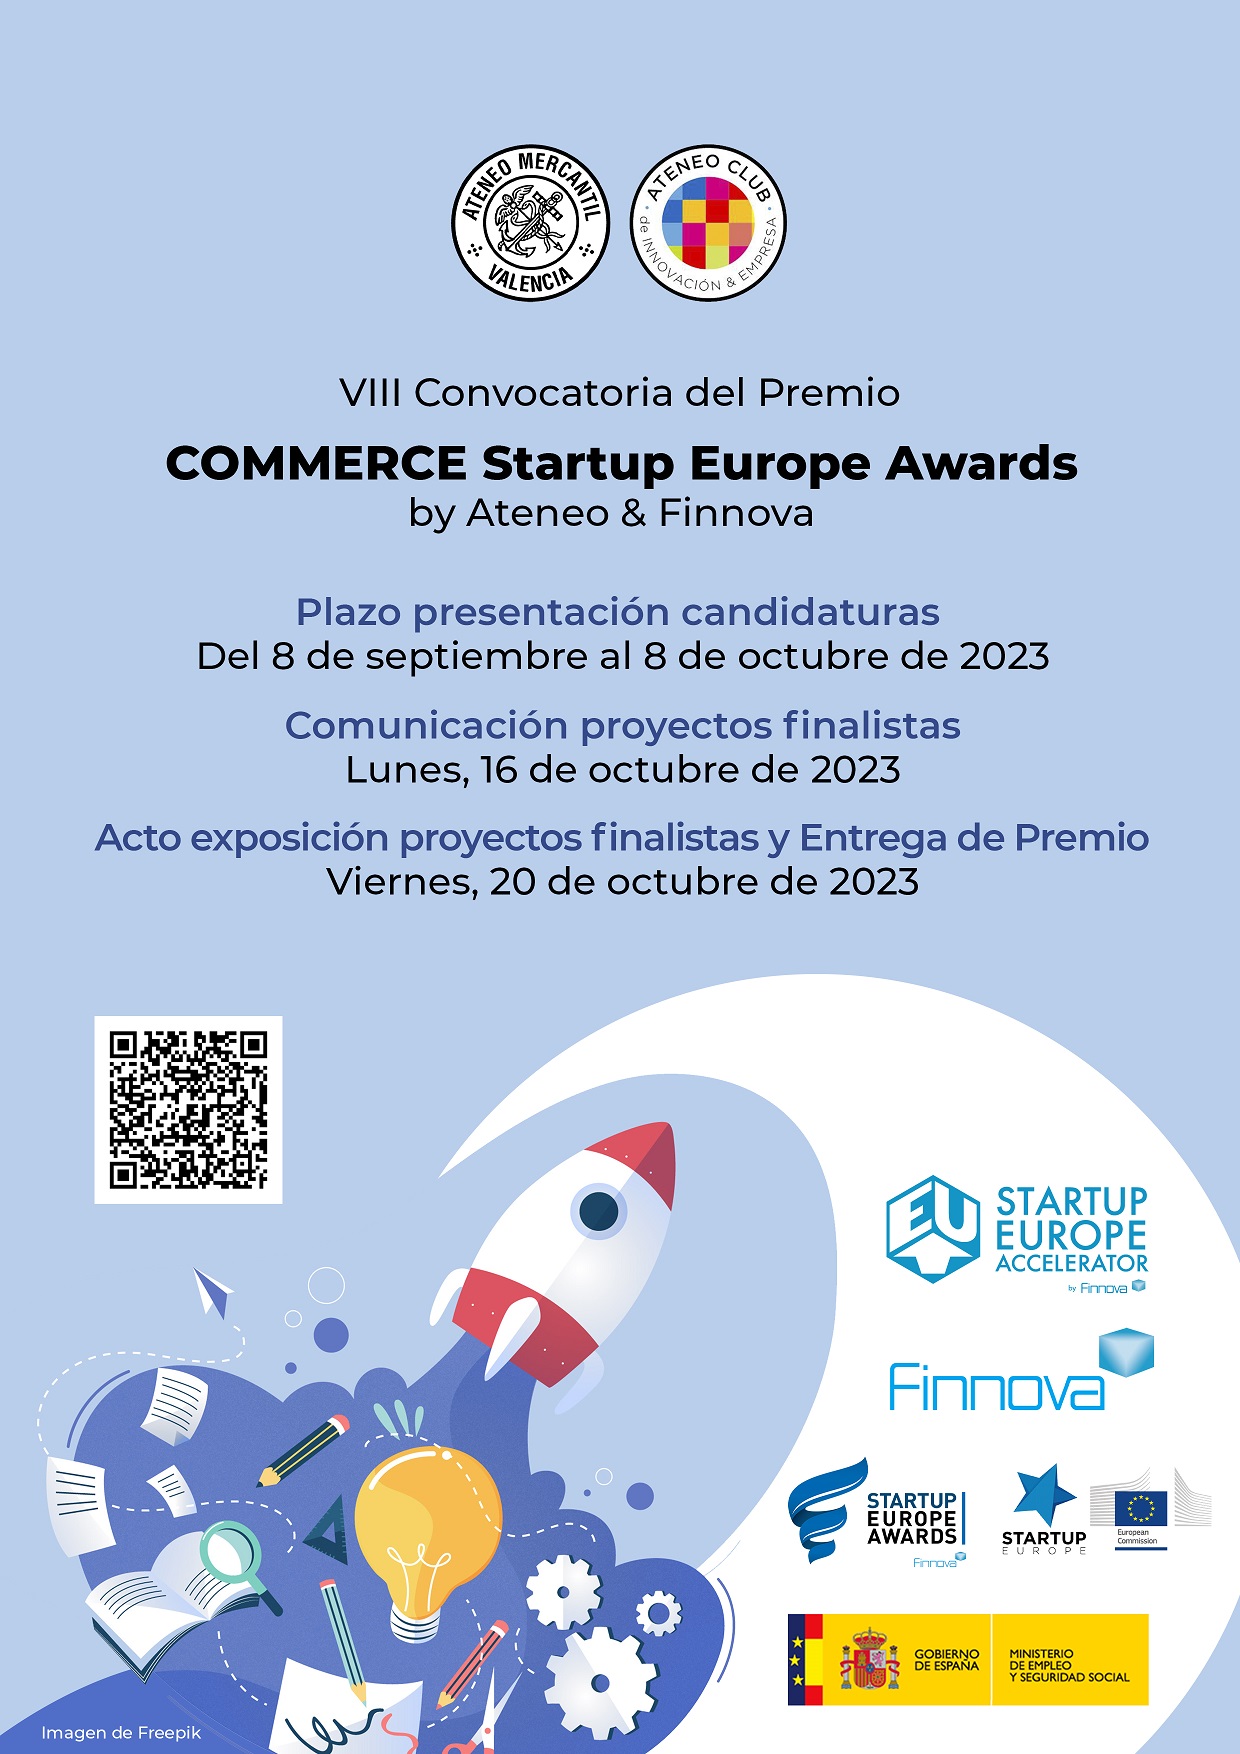 COMMERCE Startup Europe Awards by Ateneo & Finnova 2023